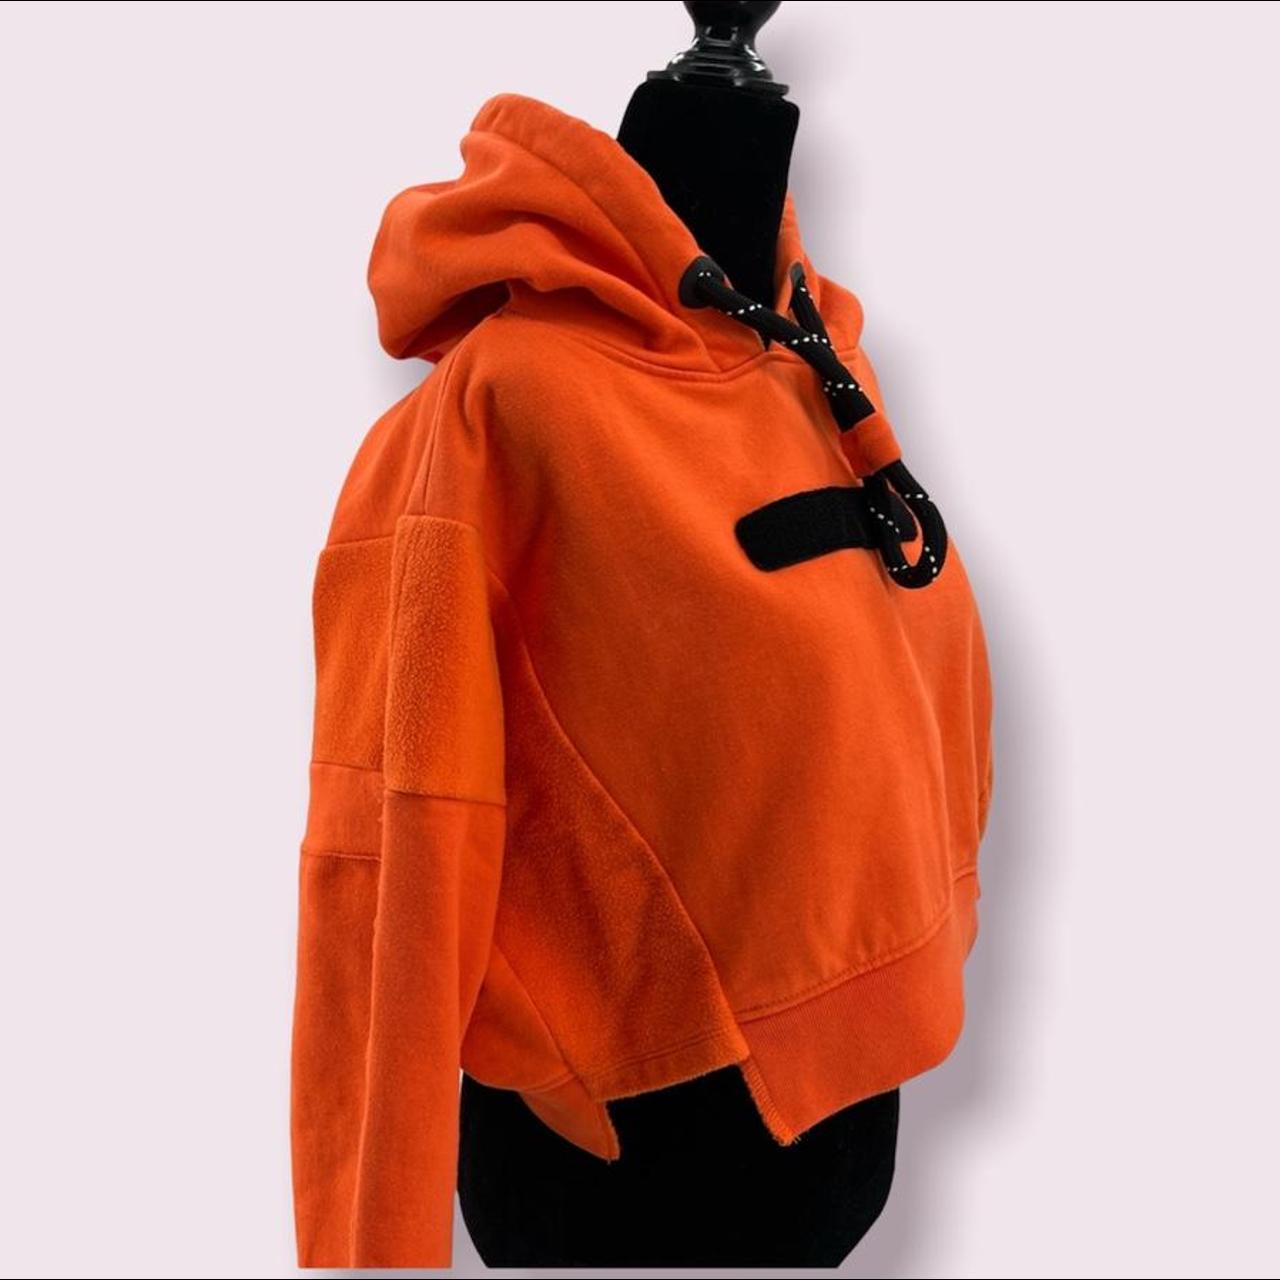 Product Image 2 - PARASUCO Orange cropped hoddie🧡
Excellent preowned